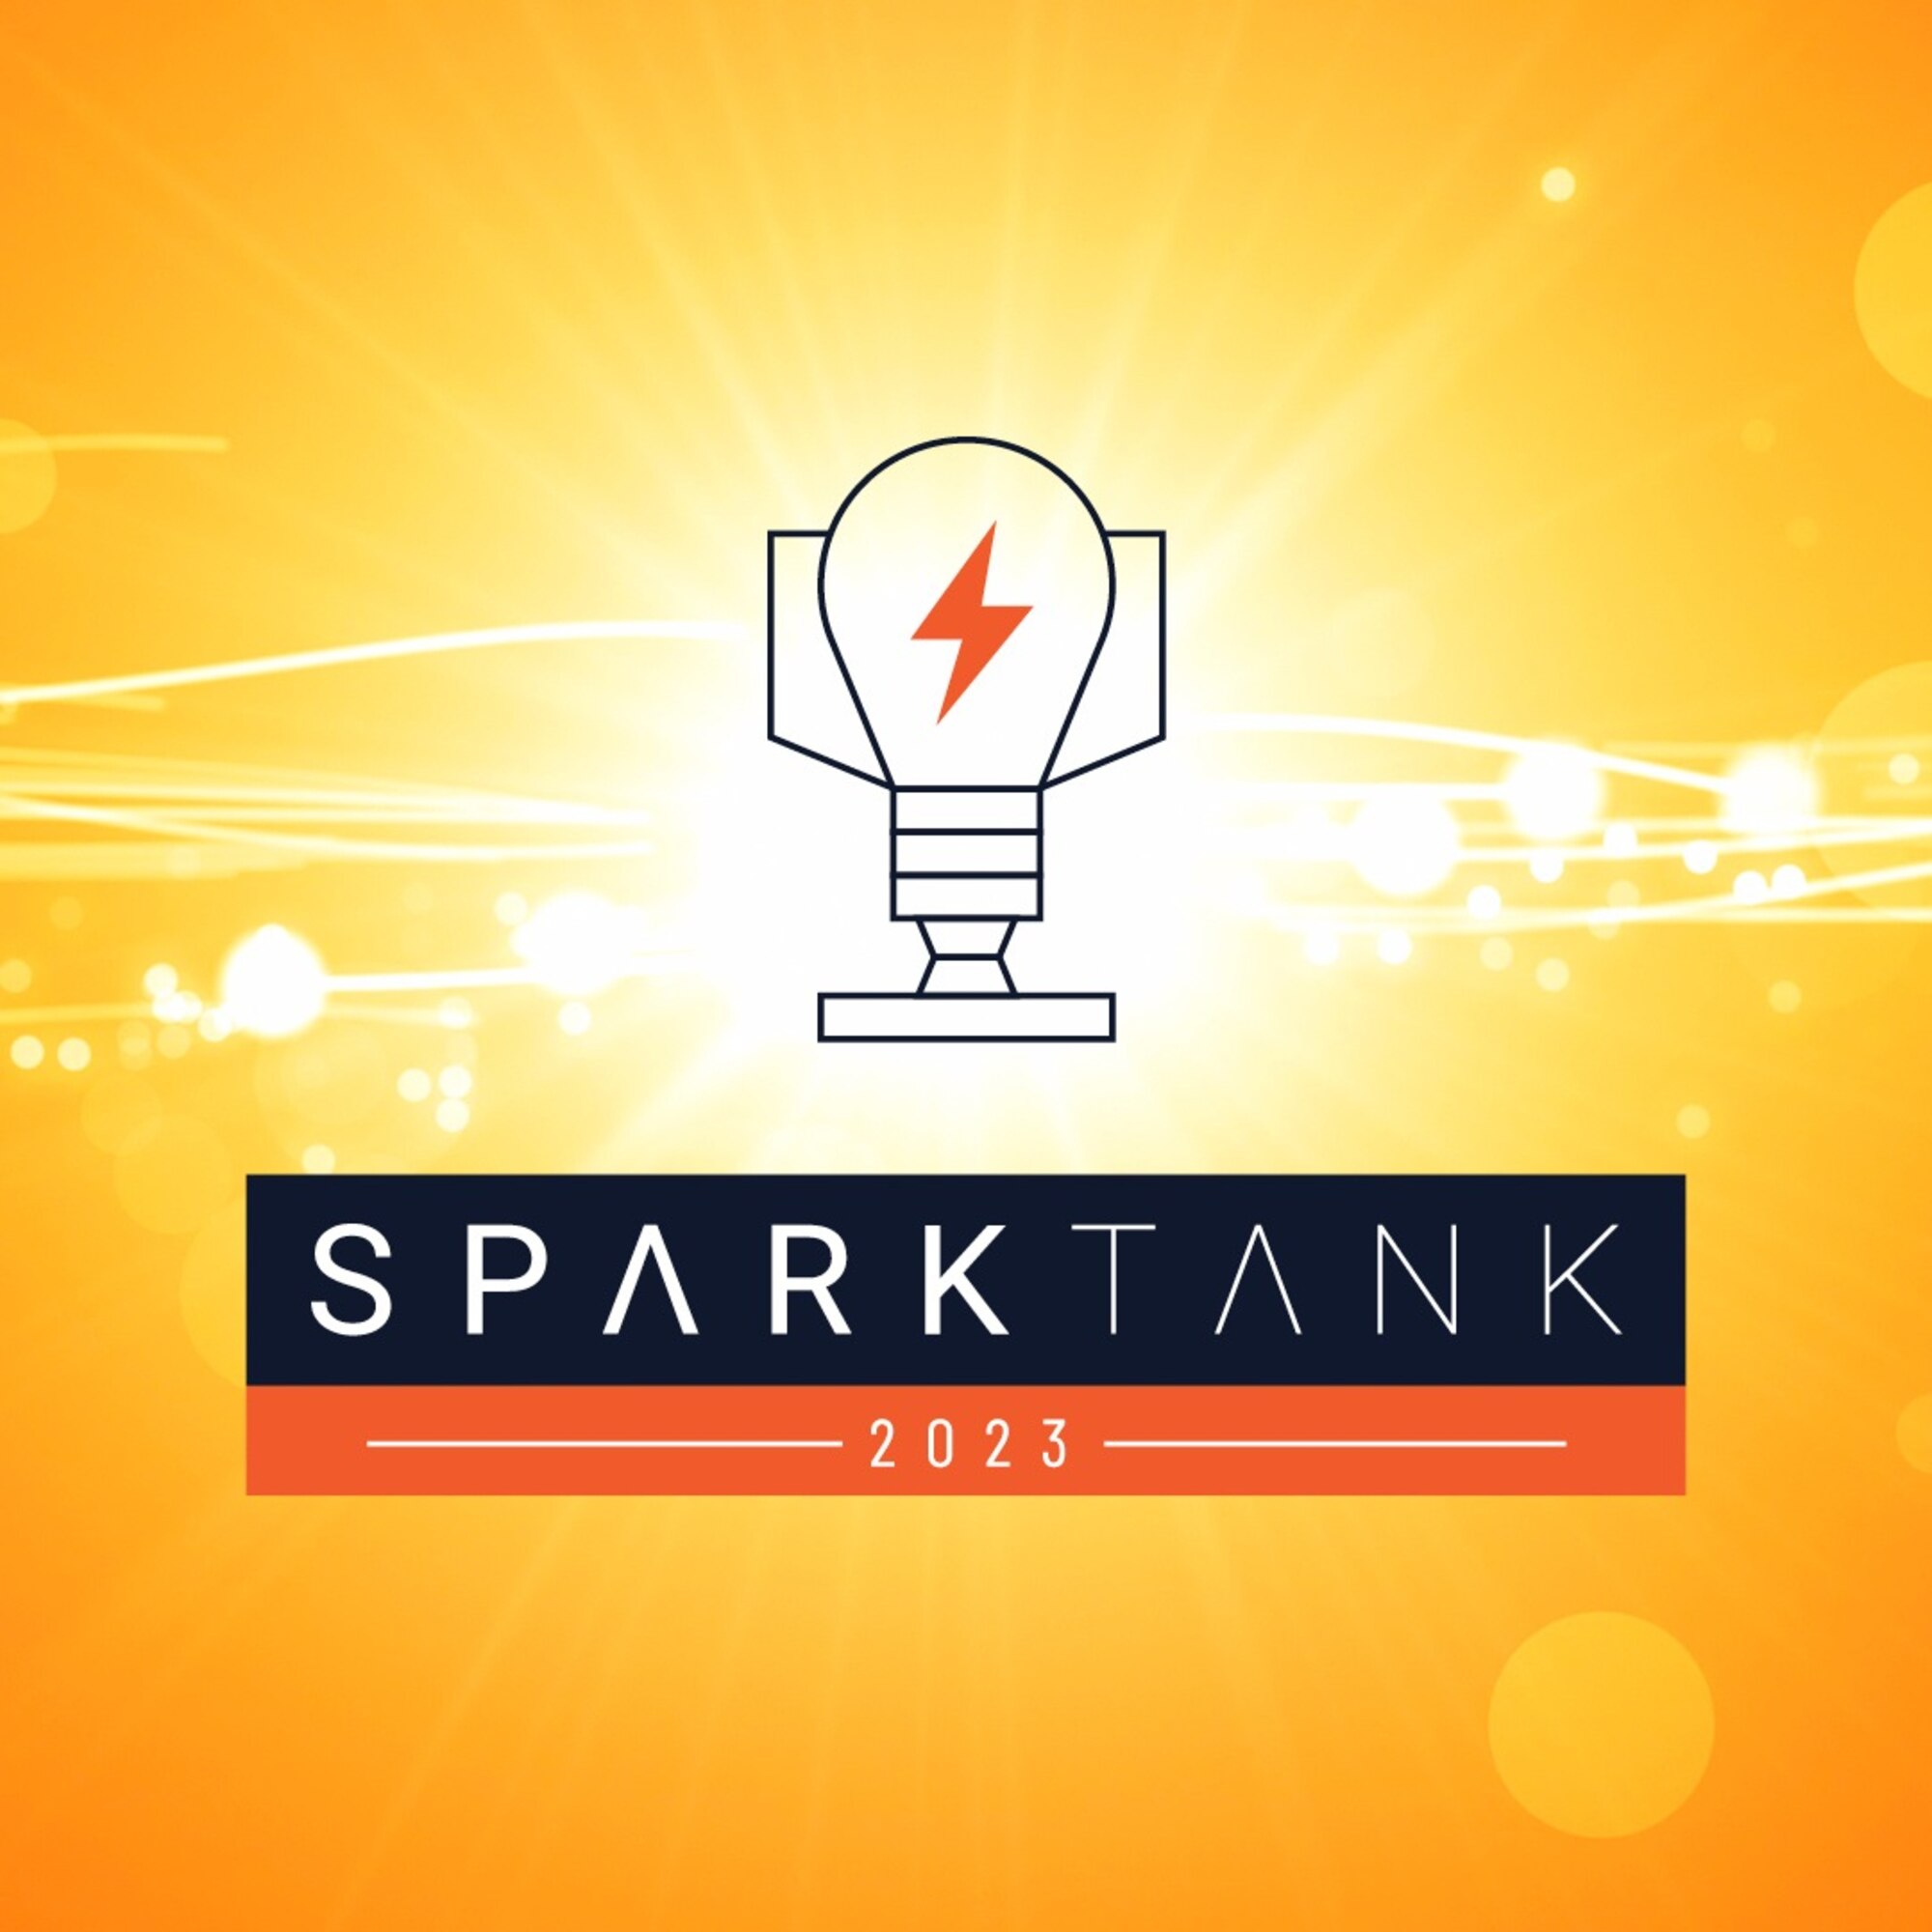 Get ready for Spark Tank 2023 coming this Spring!